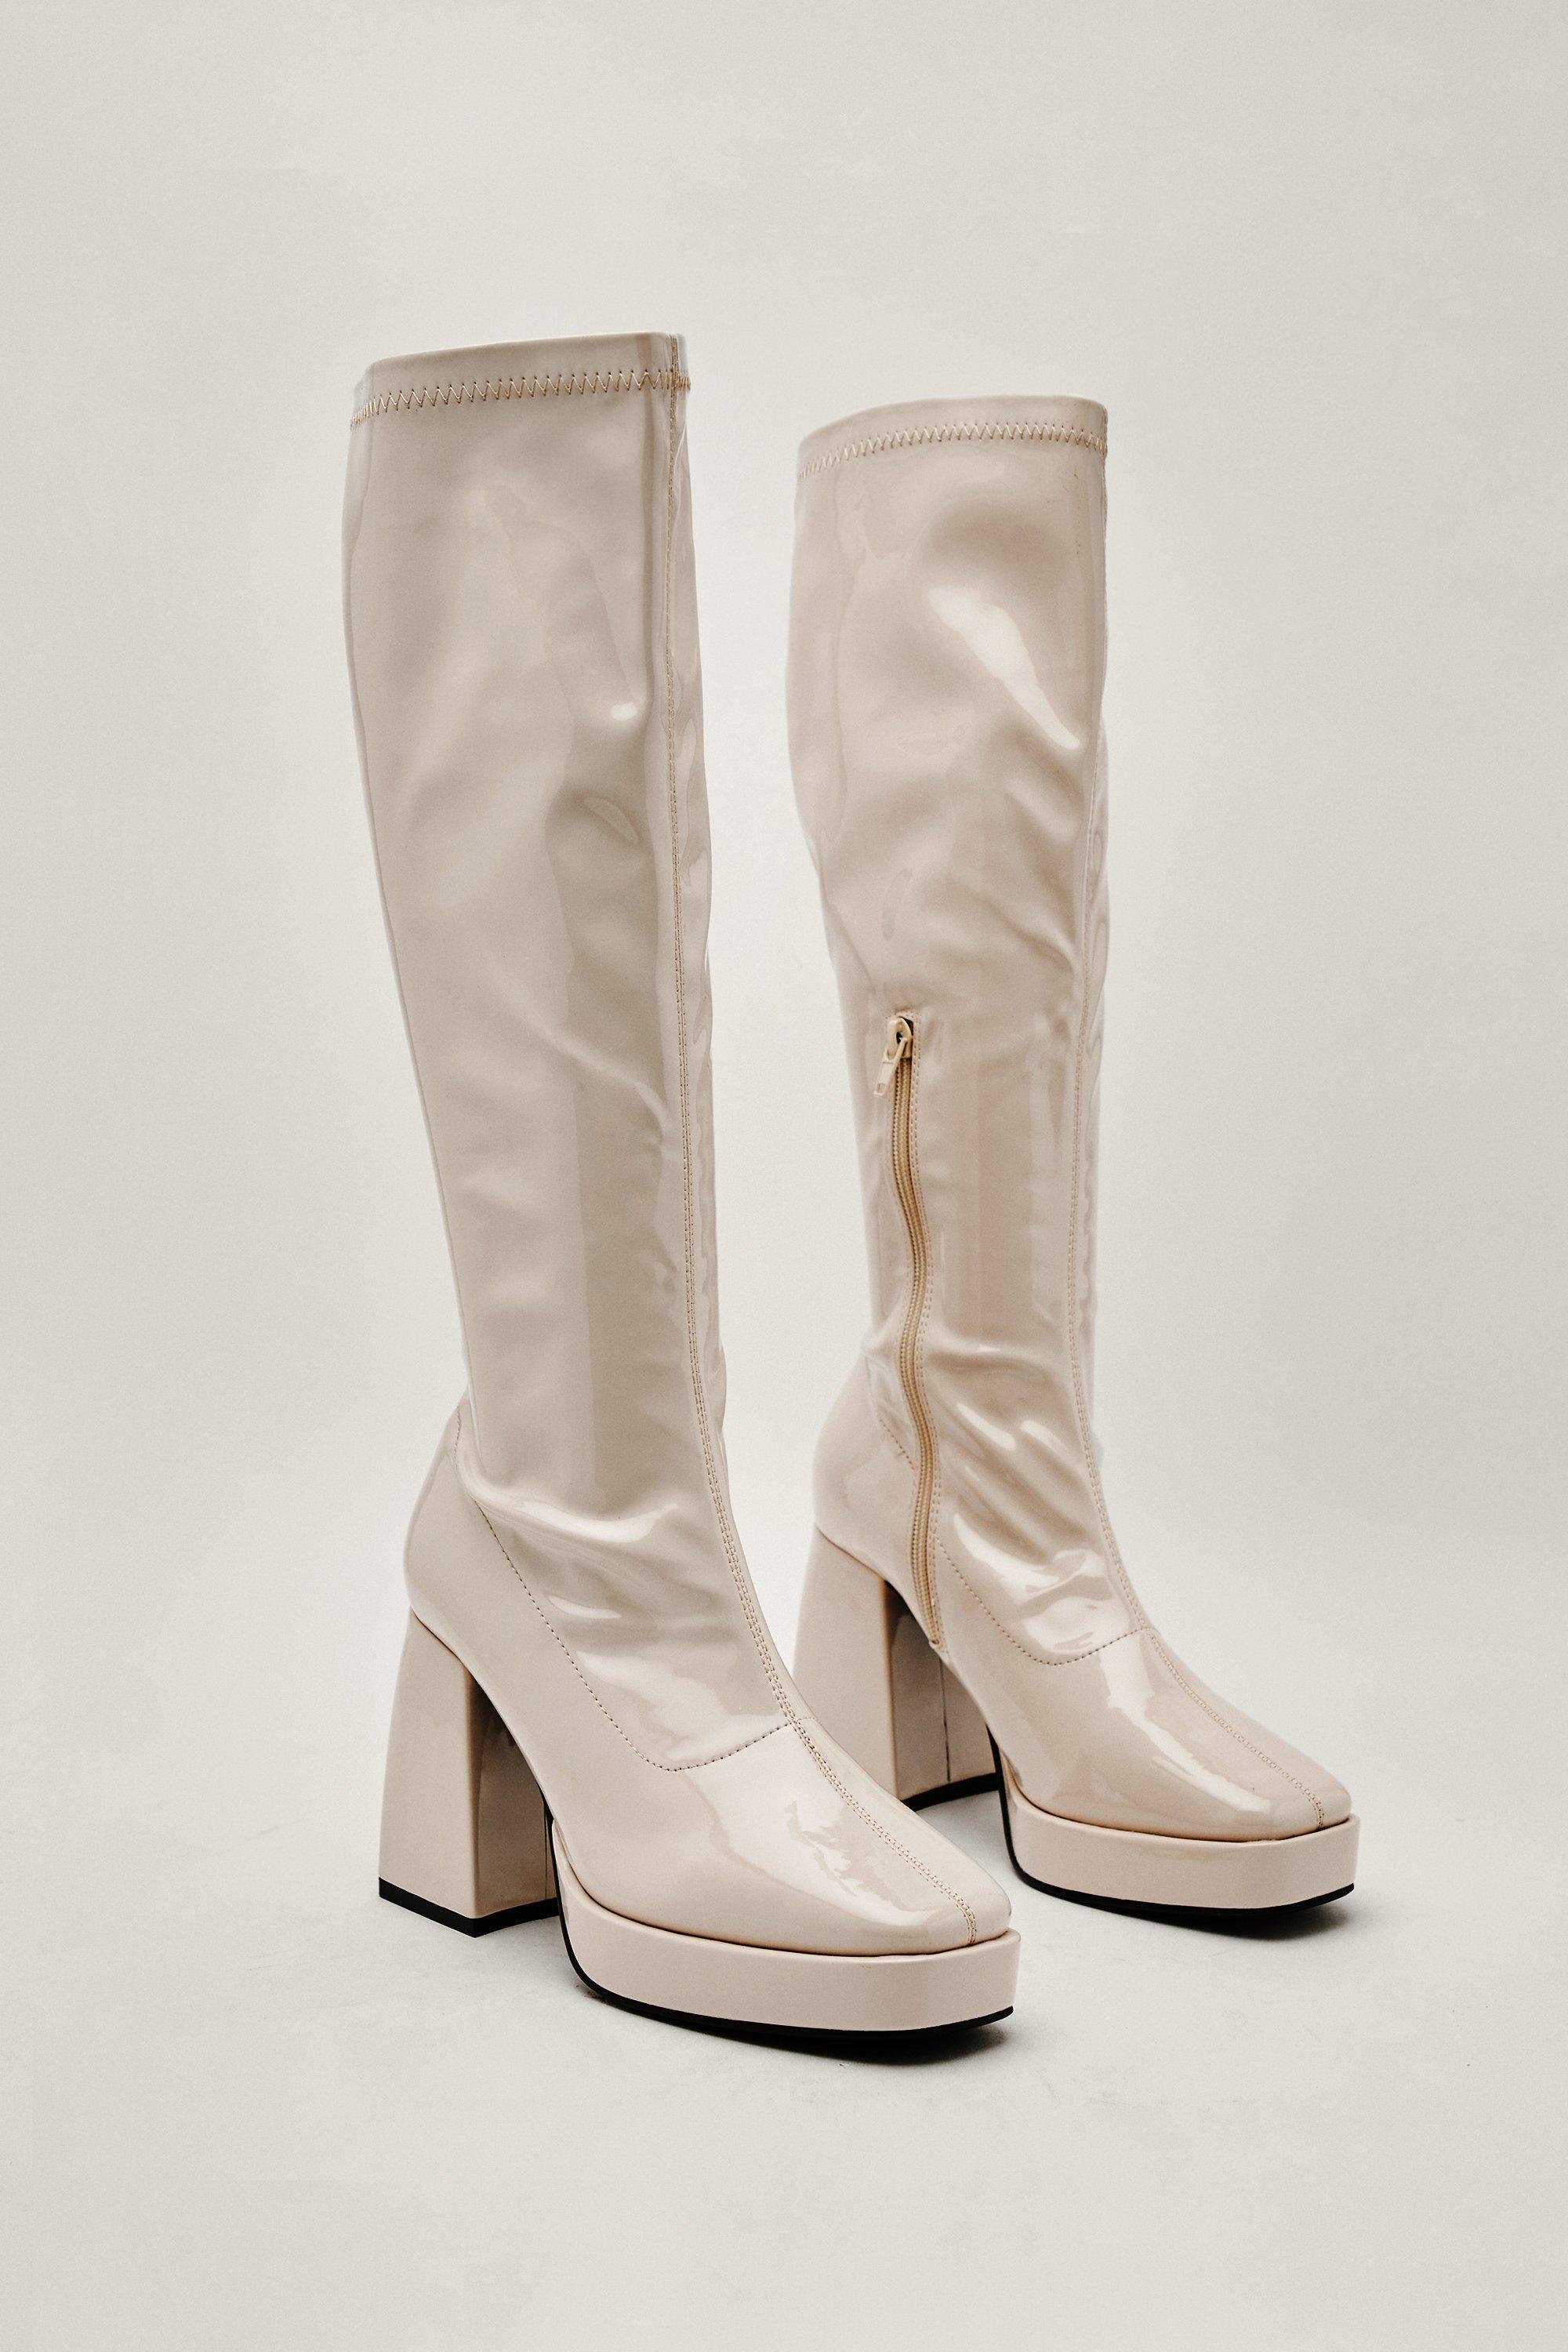 Nasty Gal Patent Faux Leather Knee High Platform Boots in Natural | Lyst